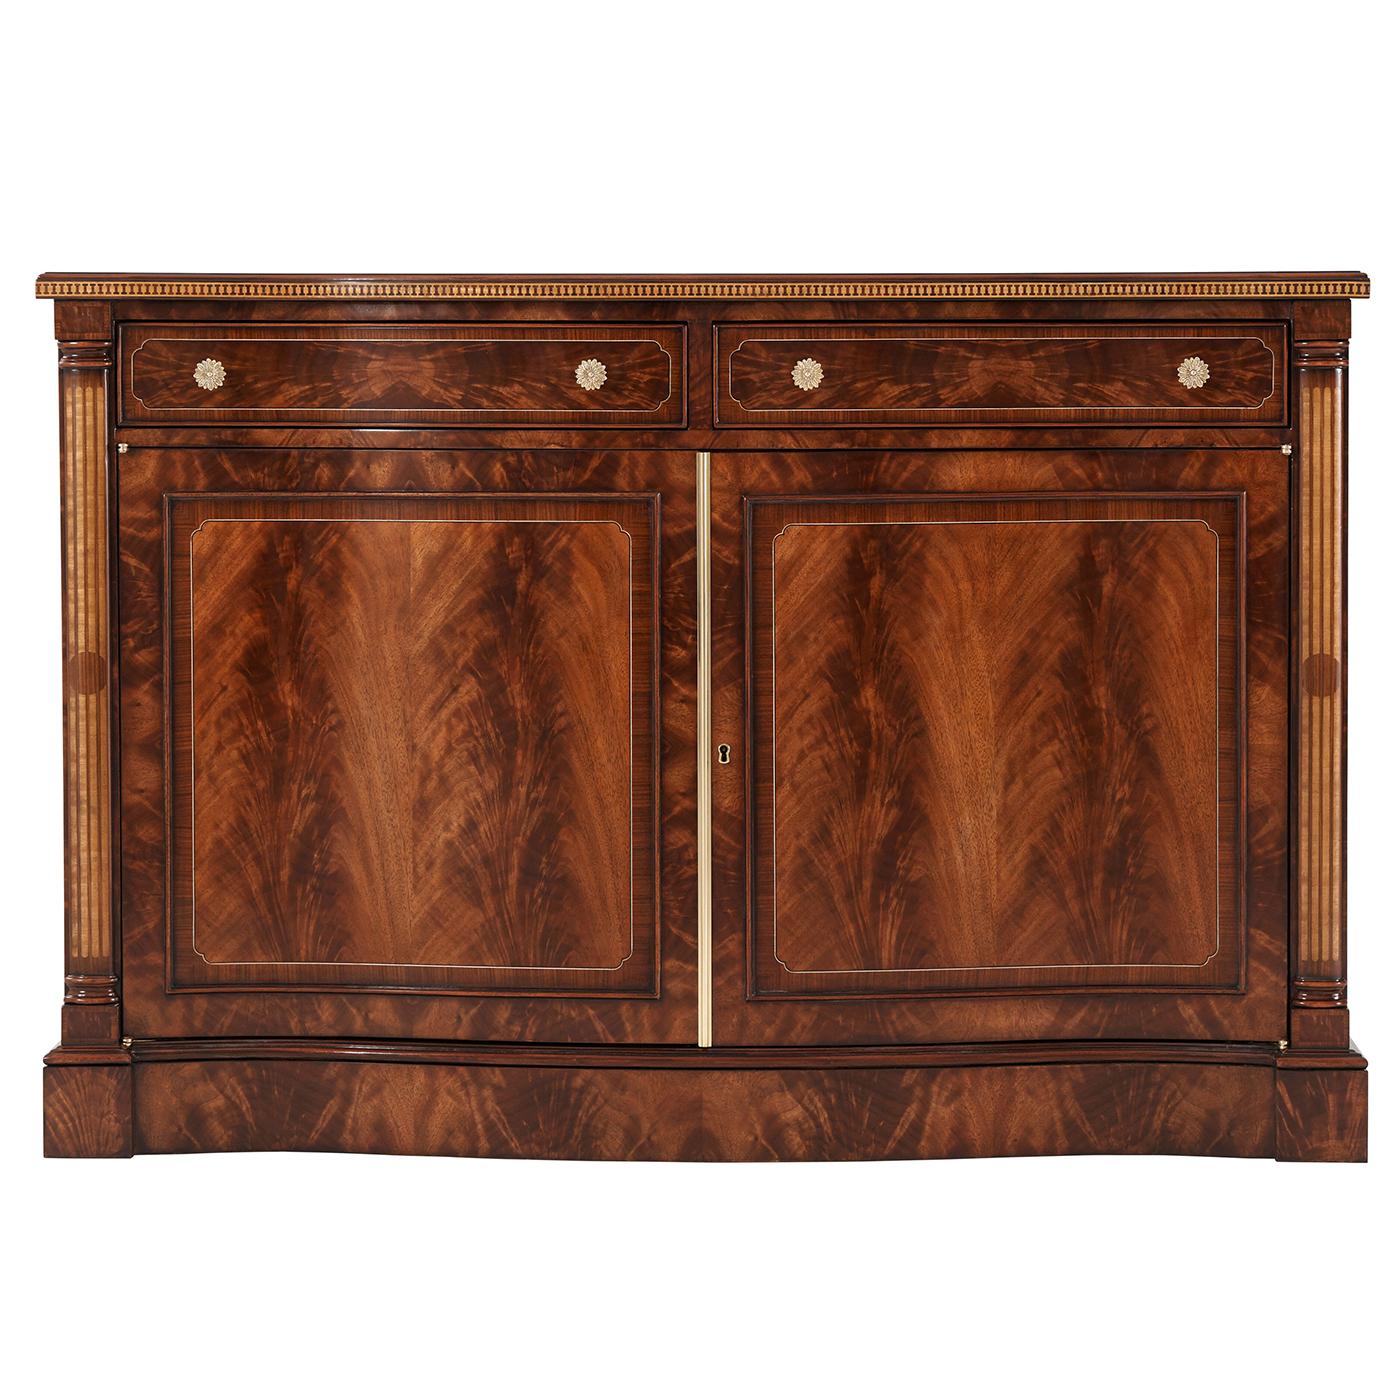 A fine George III style flame mahogany and morado banded side cabinet with fine double stringing throughout, the serpentine top with a parquetry edge above two panel inlaid drawers with floral brass handles, above two paneled doors enclosing an